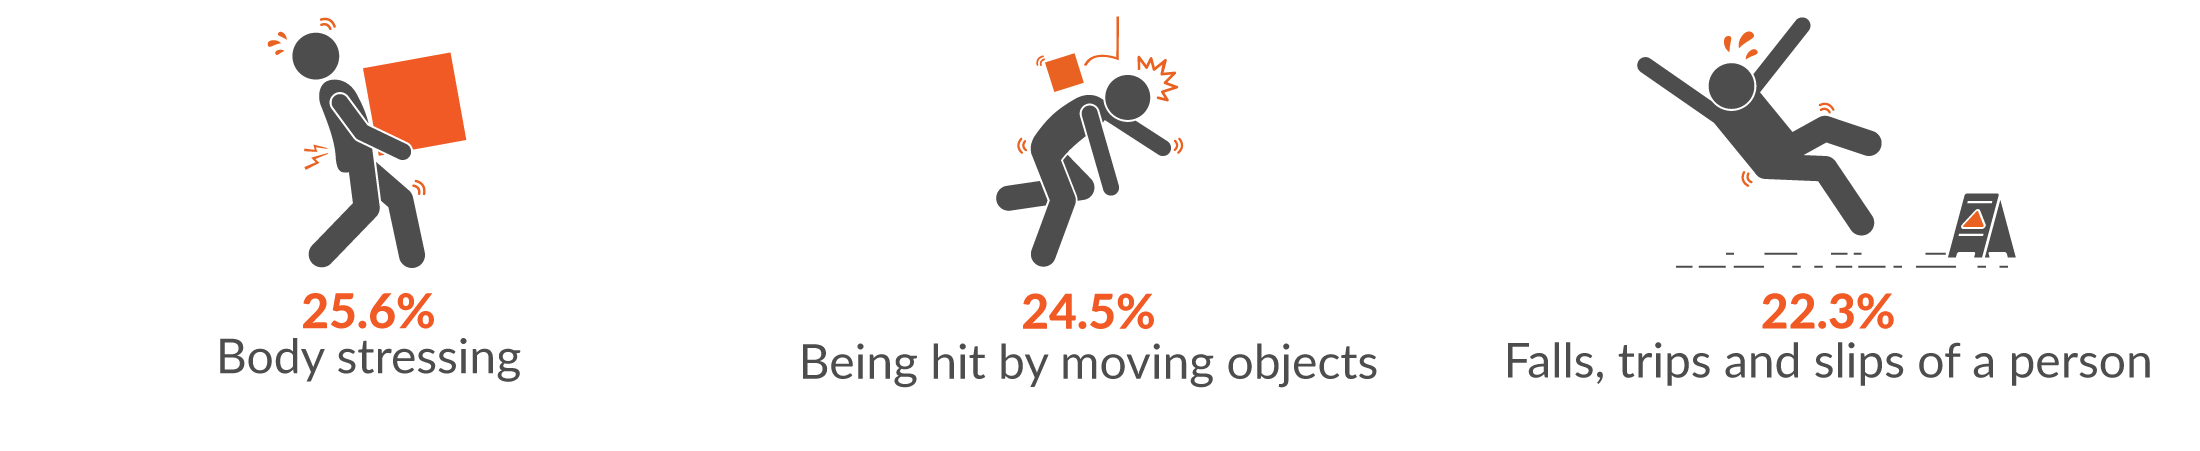 This infographic shows the main three mechanisms for serious injuries were 25.6% body stressing; 24.5% being hit by moving objects; and 22.3% falls, trips and slips of a person.